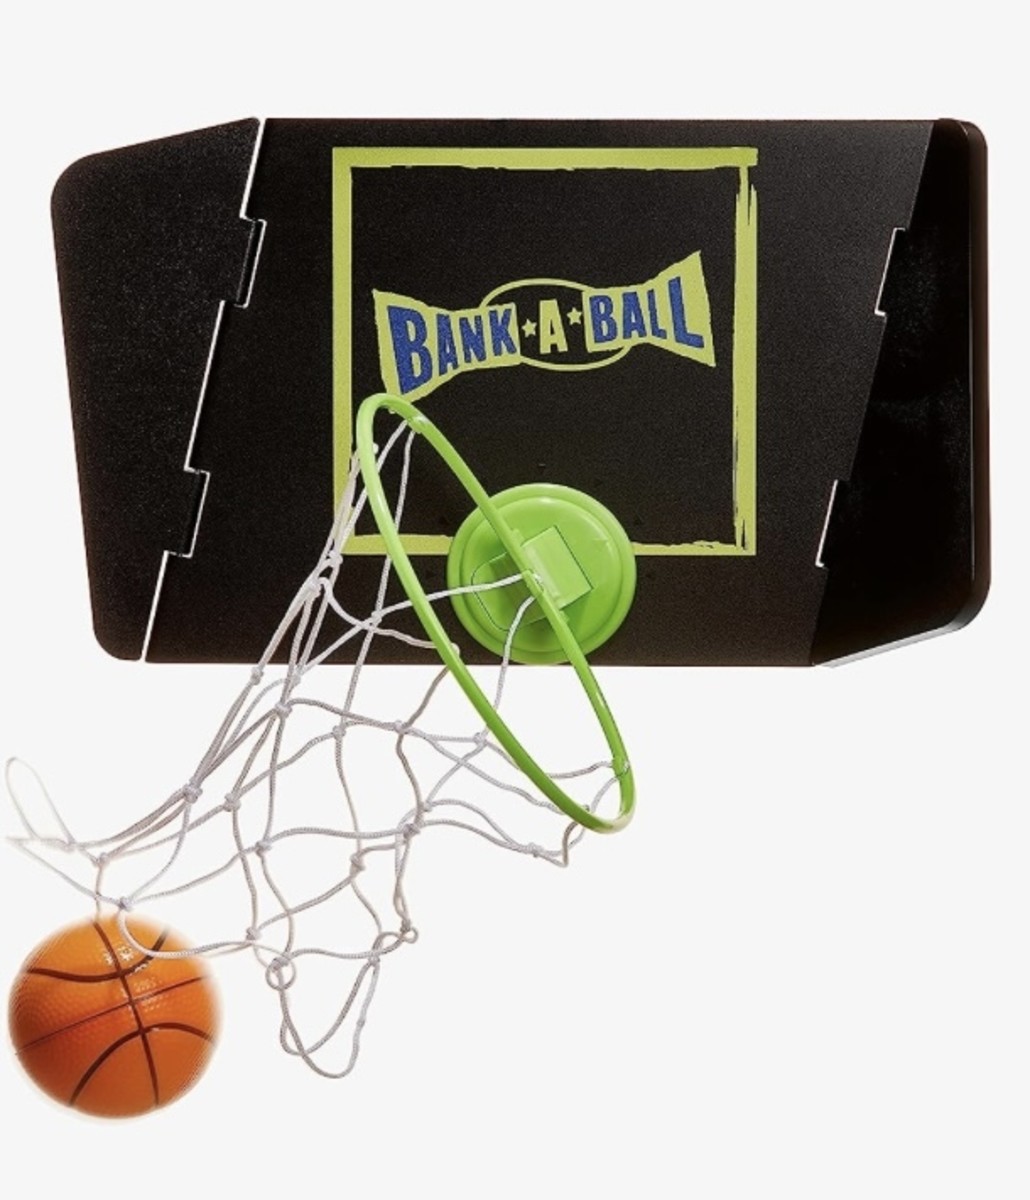 Trick Shots Forever With the Bank-A-Ball Trick Shot Basketball